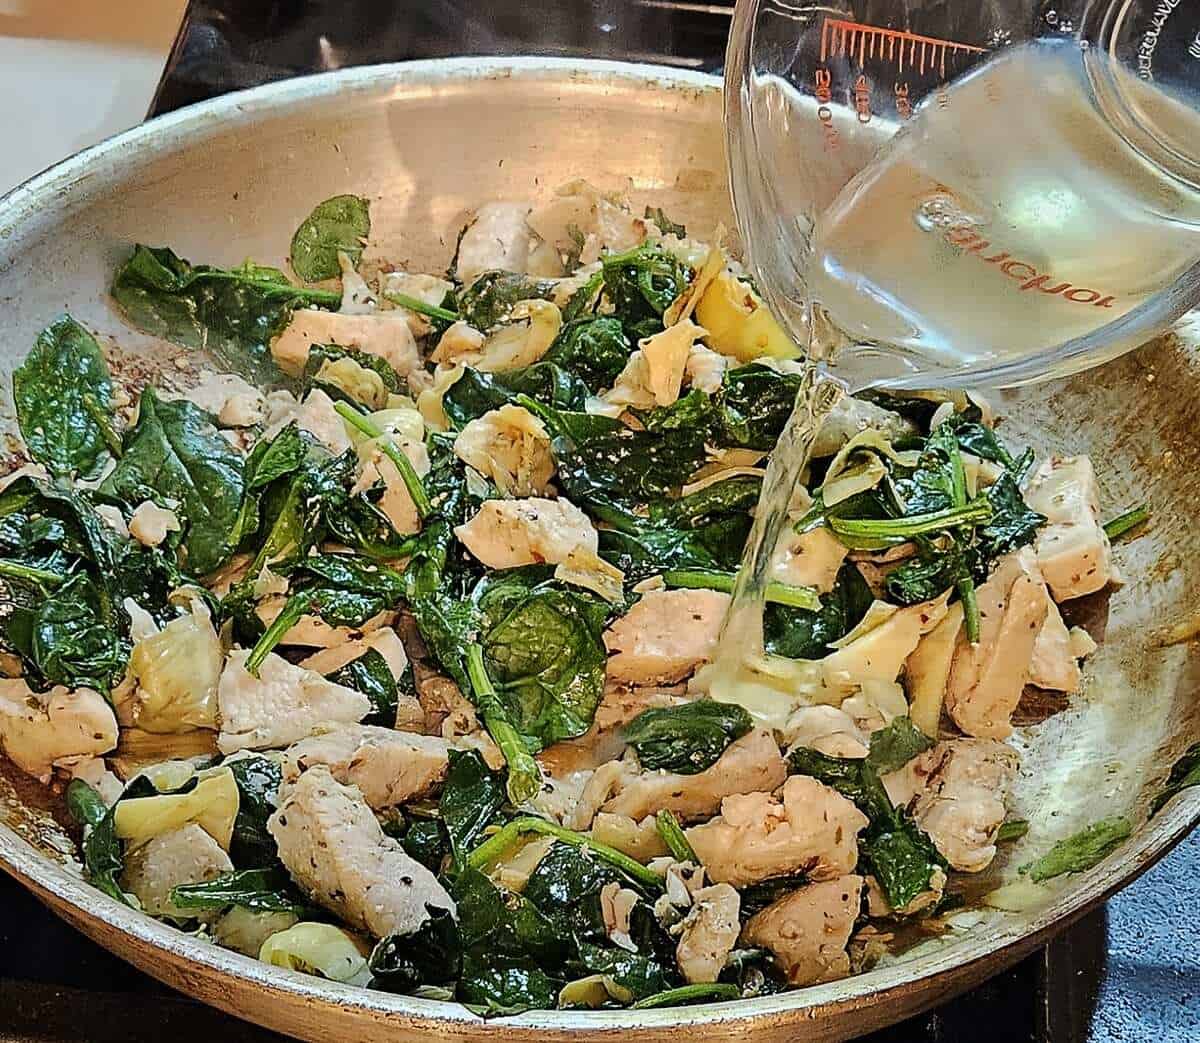 chicken, spinach, and artichoke hearts in a skillet with white wine being poured in.